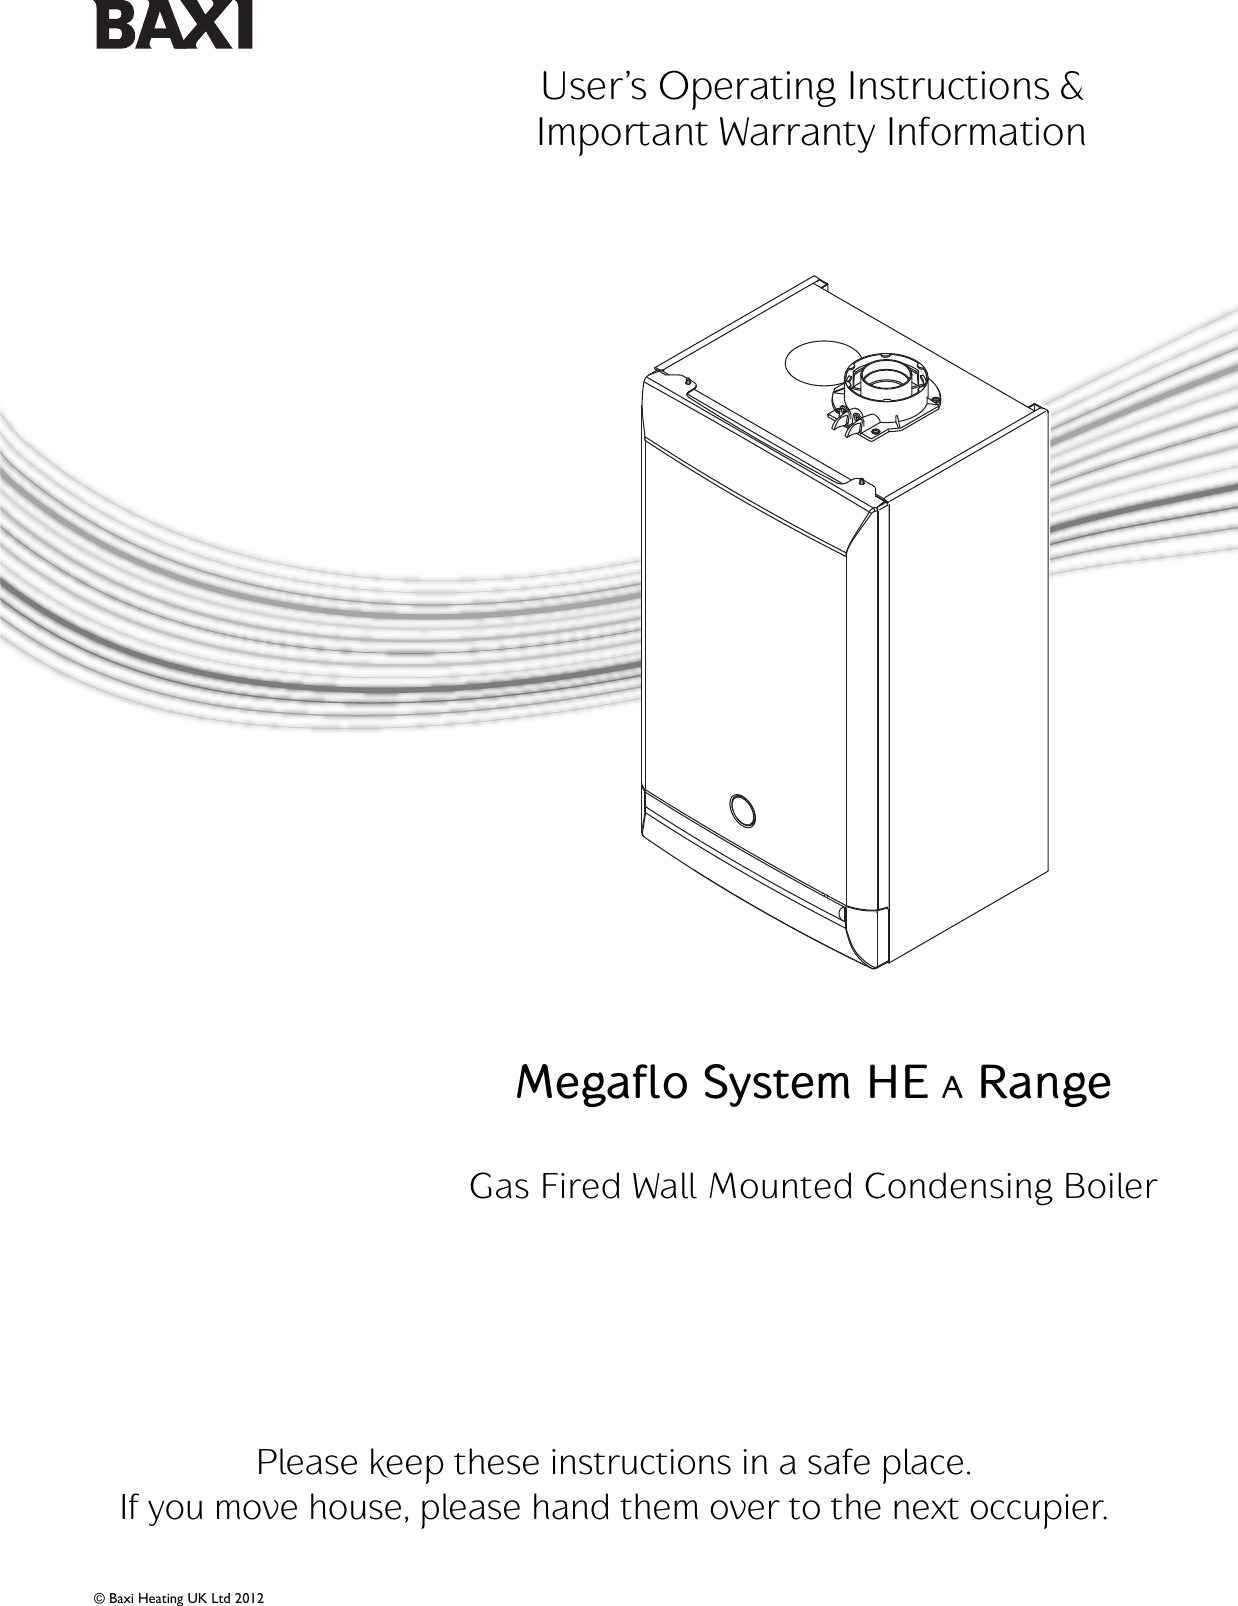 Baxi Megaflo System He A Owners Manual